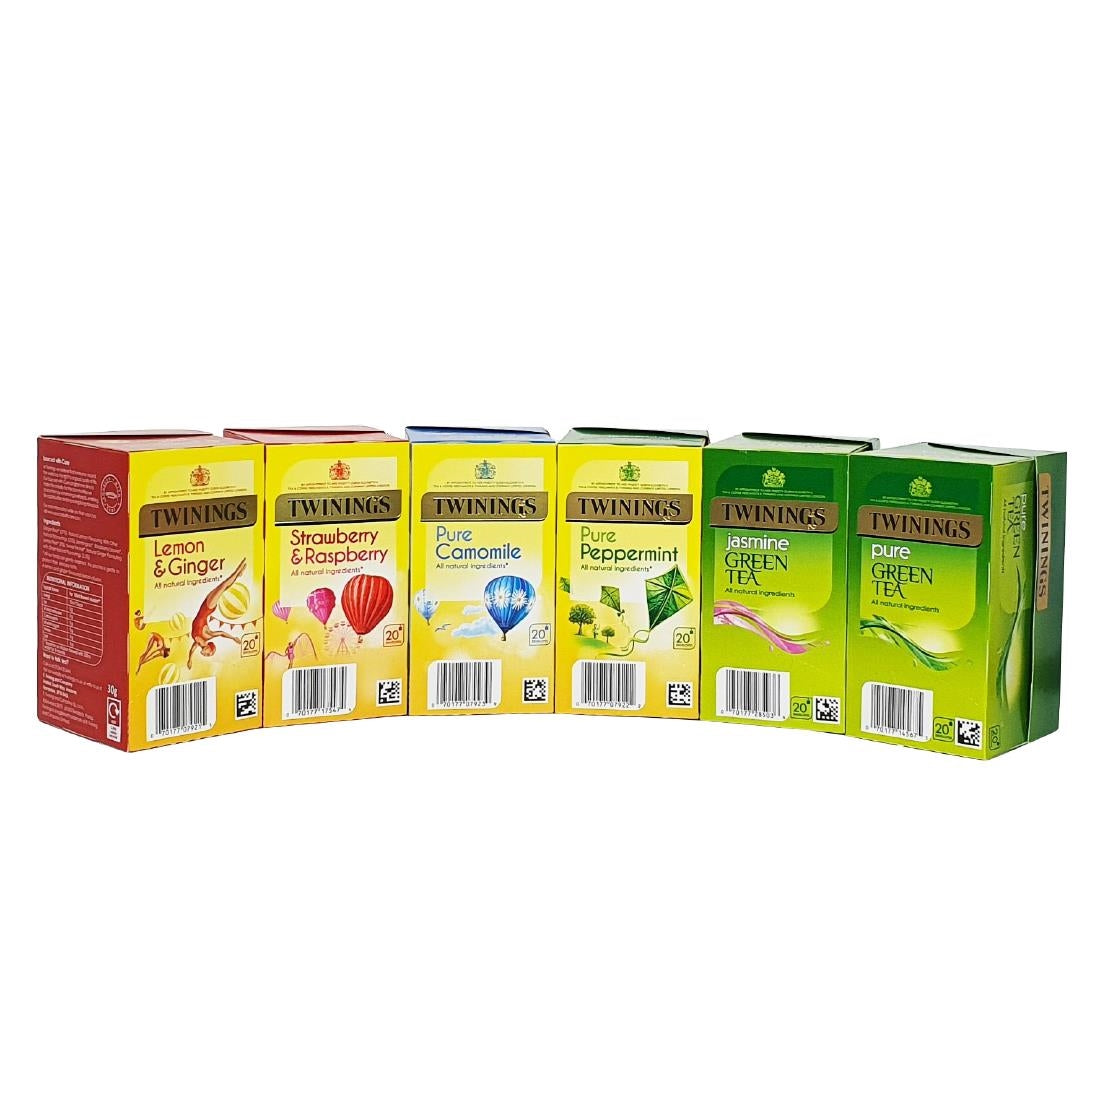 DZ468 Twinings Infusions & Green Tea Variety Pack Enveloped Tea Bags (Pack of 120)